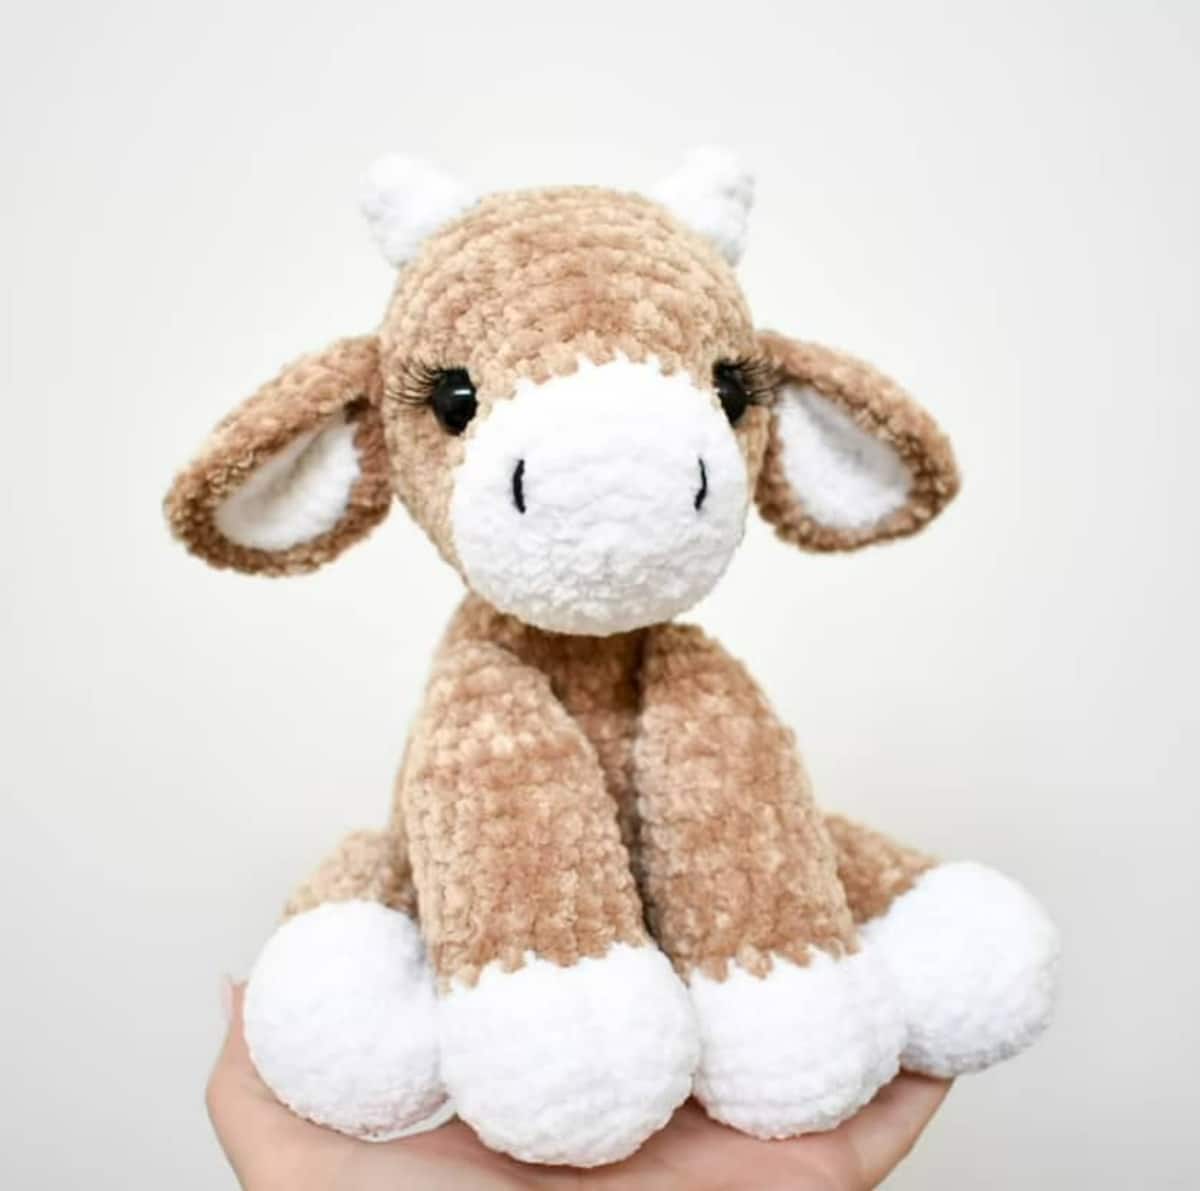 A hand holding a brown crochet cow with white feet, ears, and horns sitting down with its back legs spread behind them.